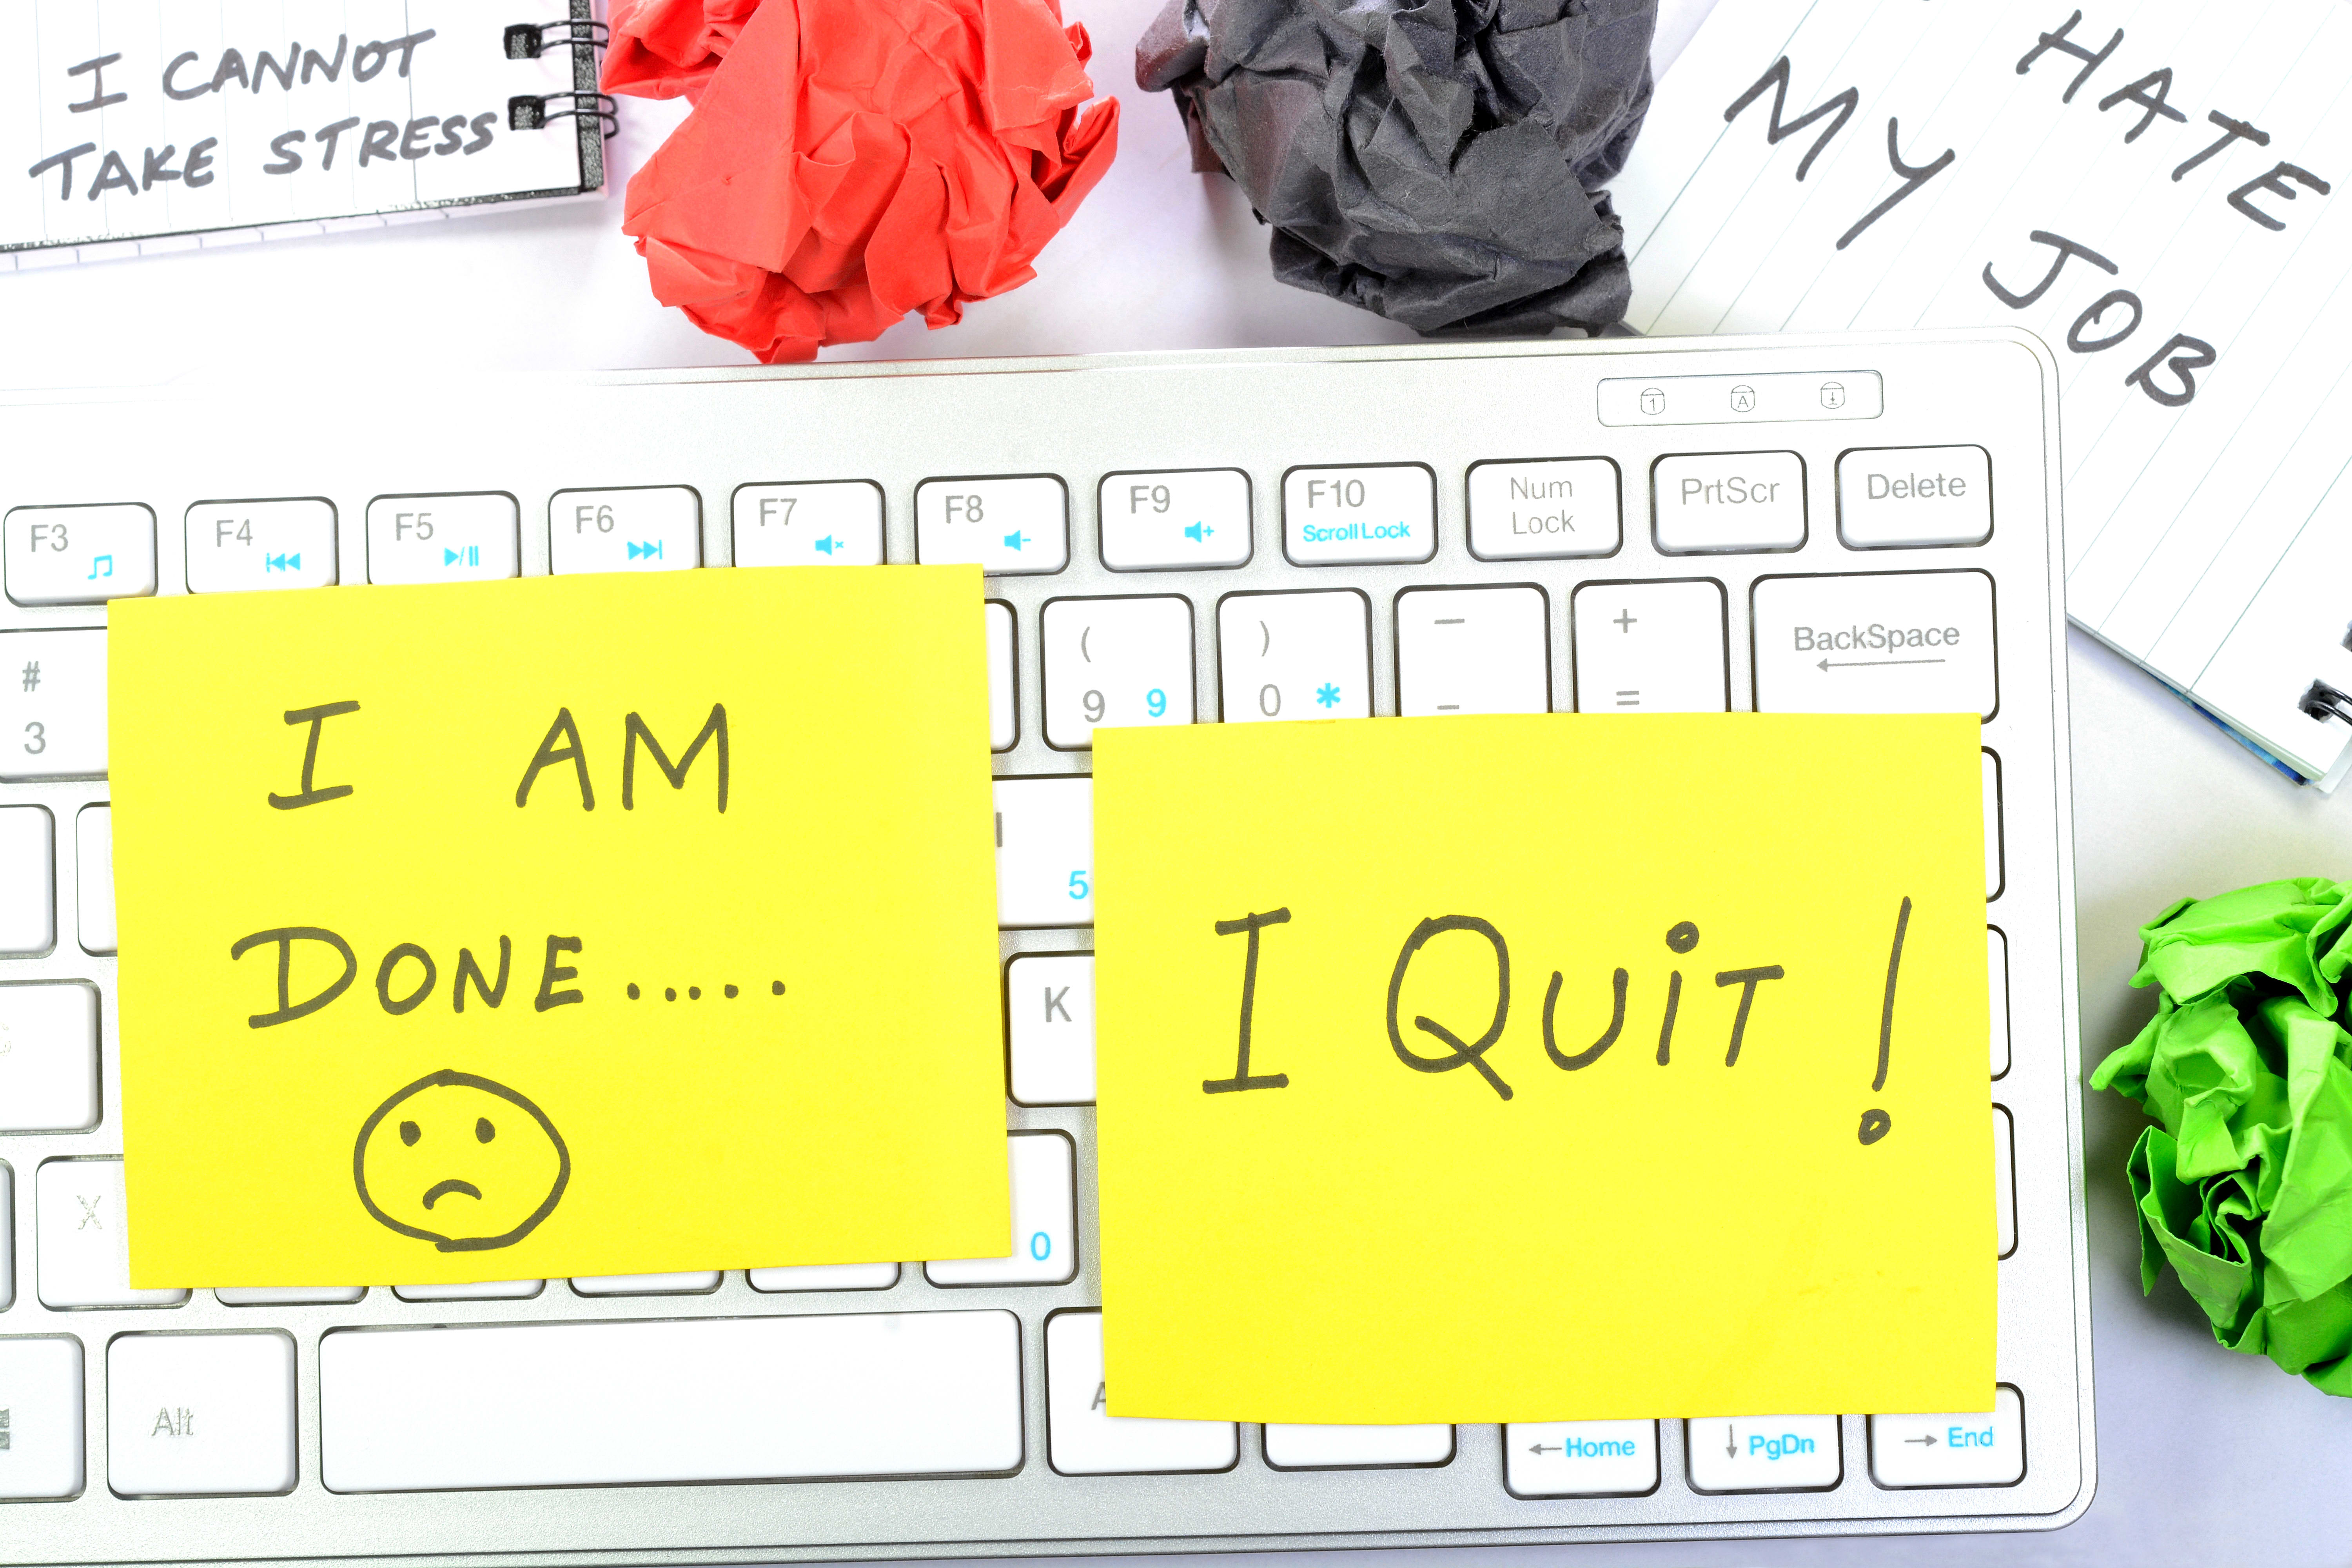 Before you impulsively quit your job, do these four things